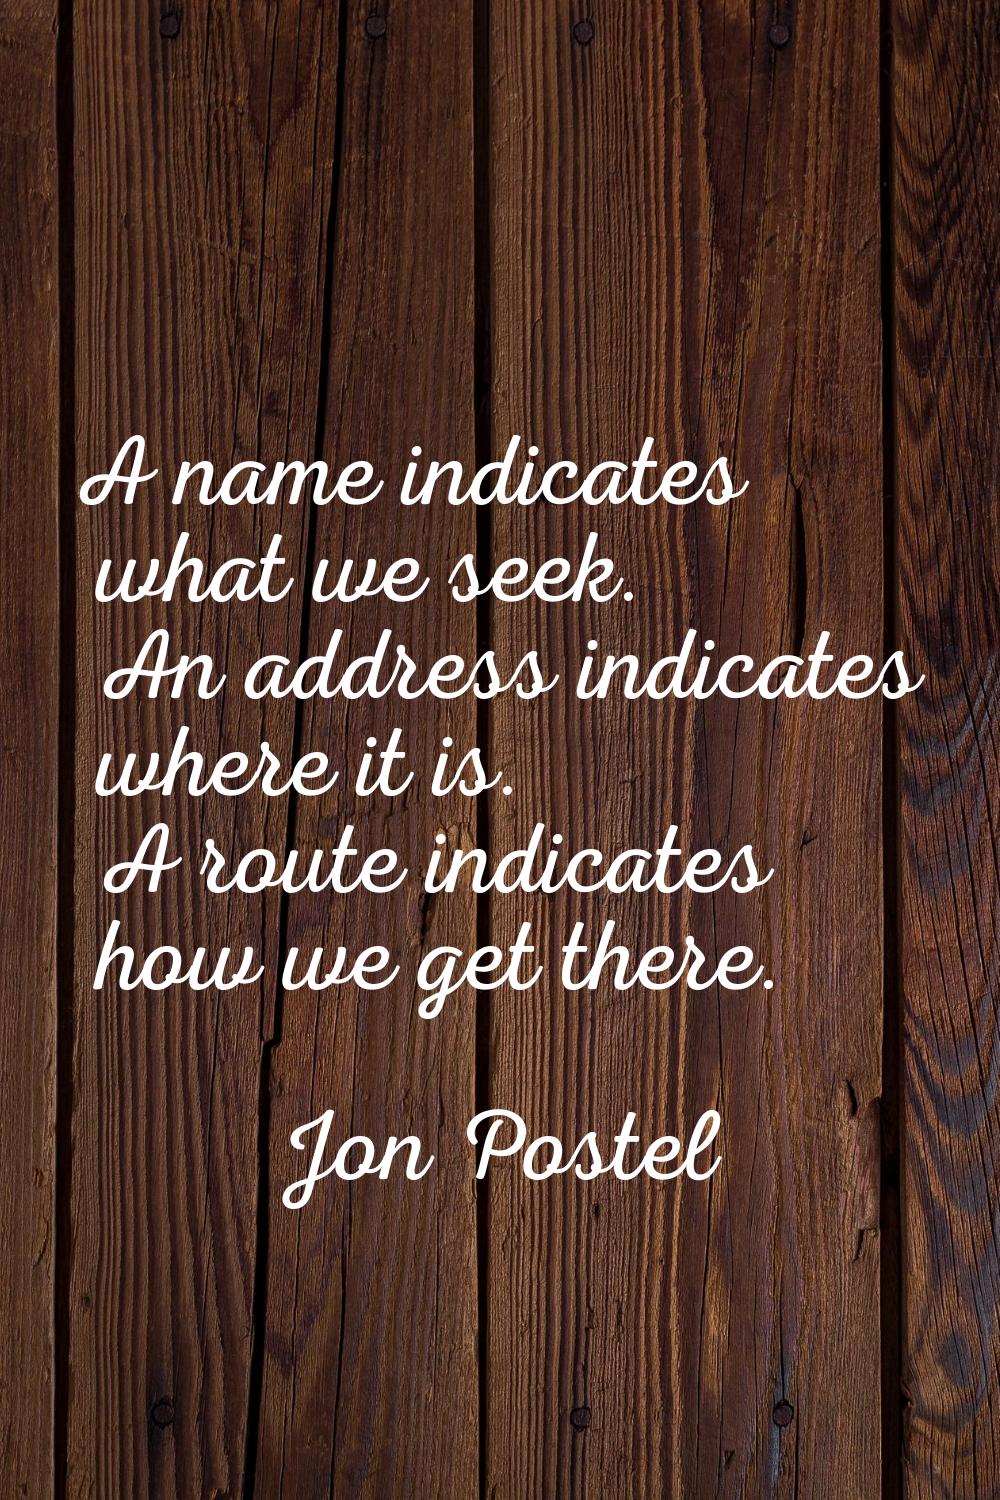 A name indicates what we seek. An address indicates where it is. A route indicates how we get there